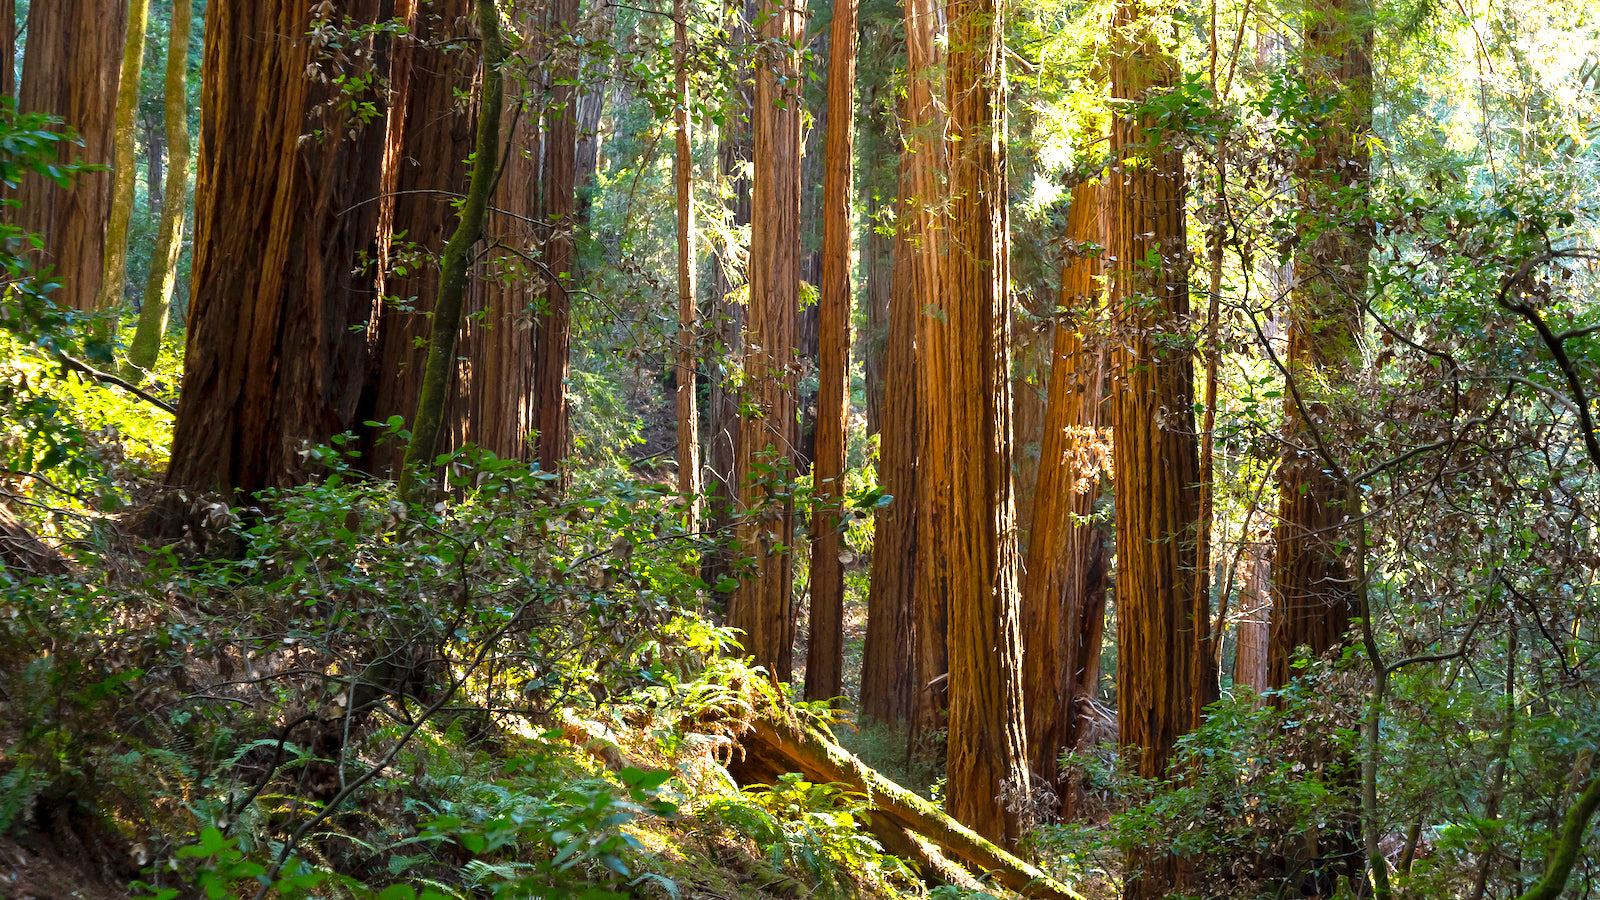 A scenic view of redwood trees at Muir Woods National Monument, with sunlight filtering through the trees.